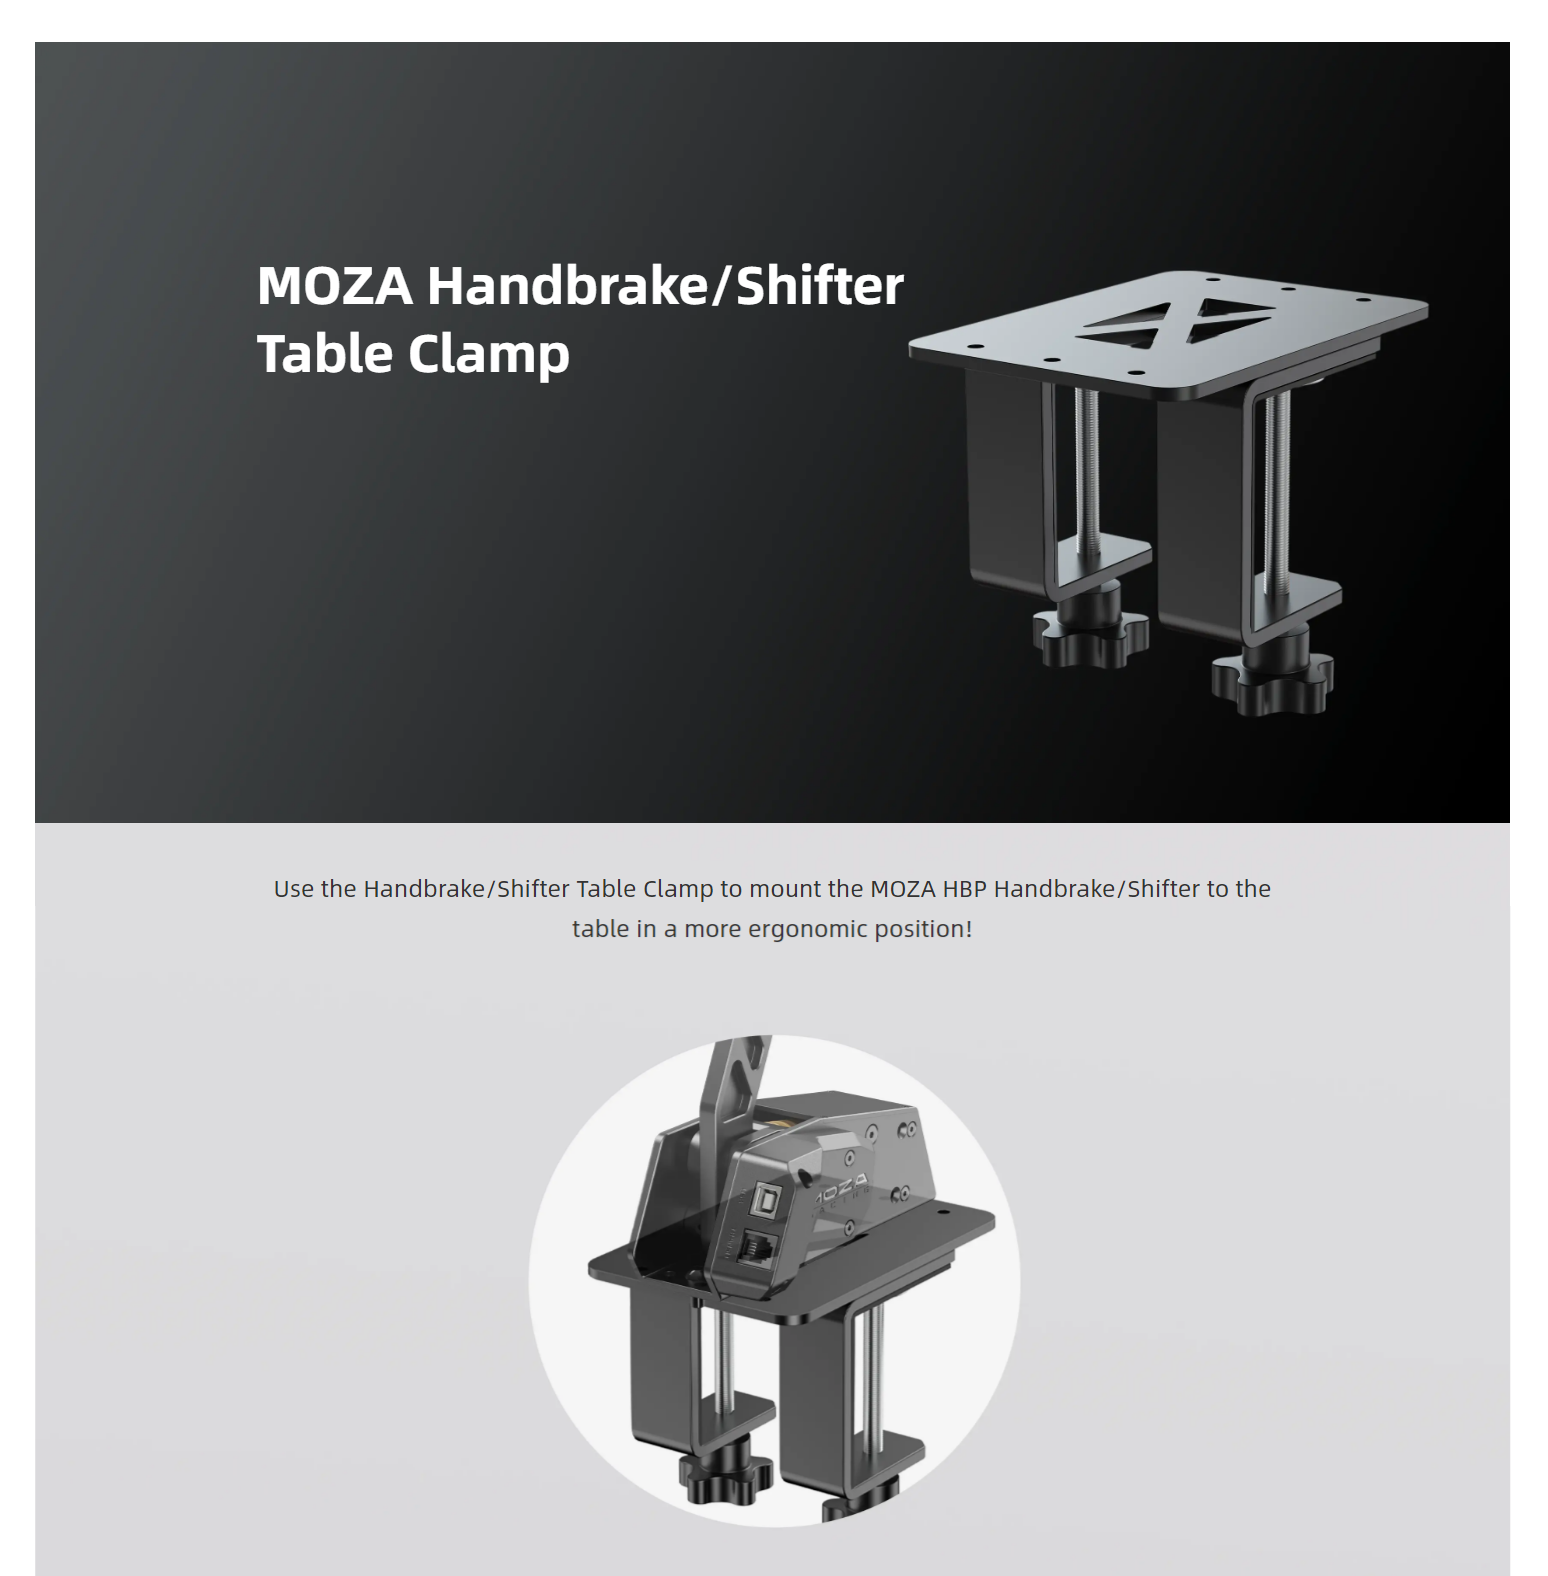 A large marketing image providing additional information about the product MOZA Handbrake & Shifter Table Clamp - Additional alt info not provided